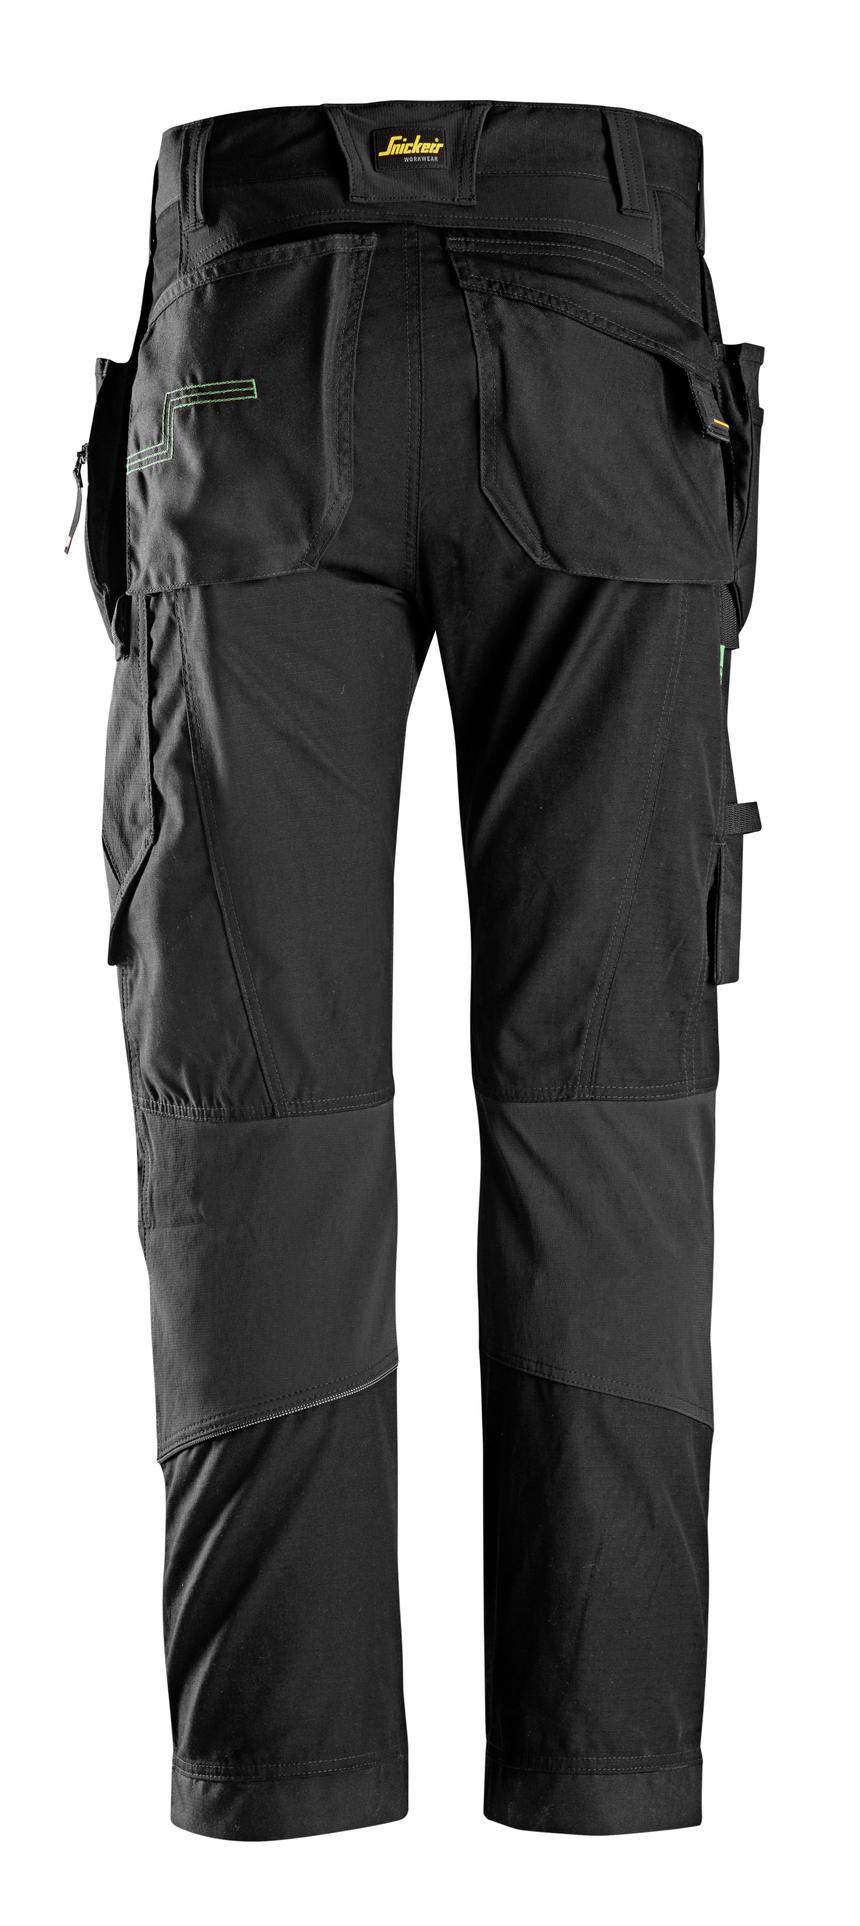 Snickers 6230 AllroundWork HiVis Trousers Holster Pockets CL2 Vario   Workwear Nation Ltd